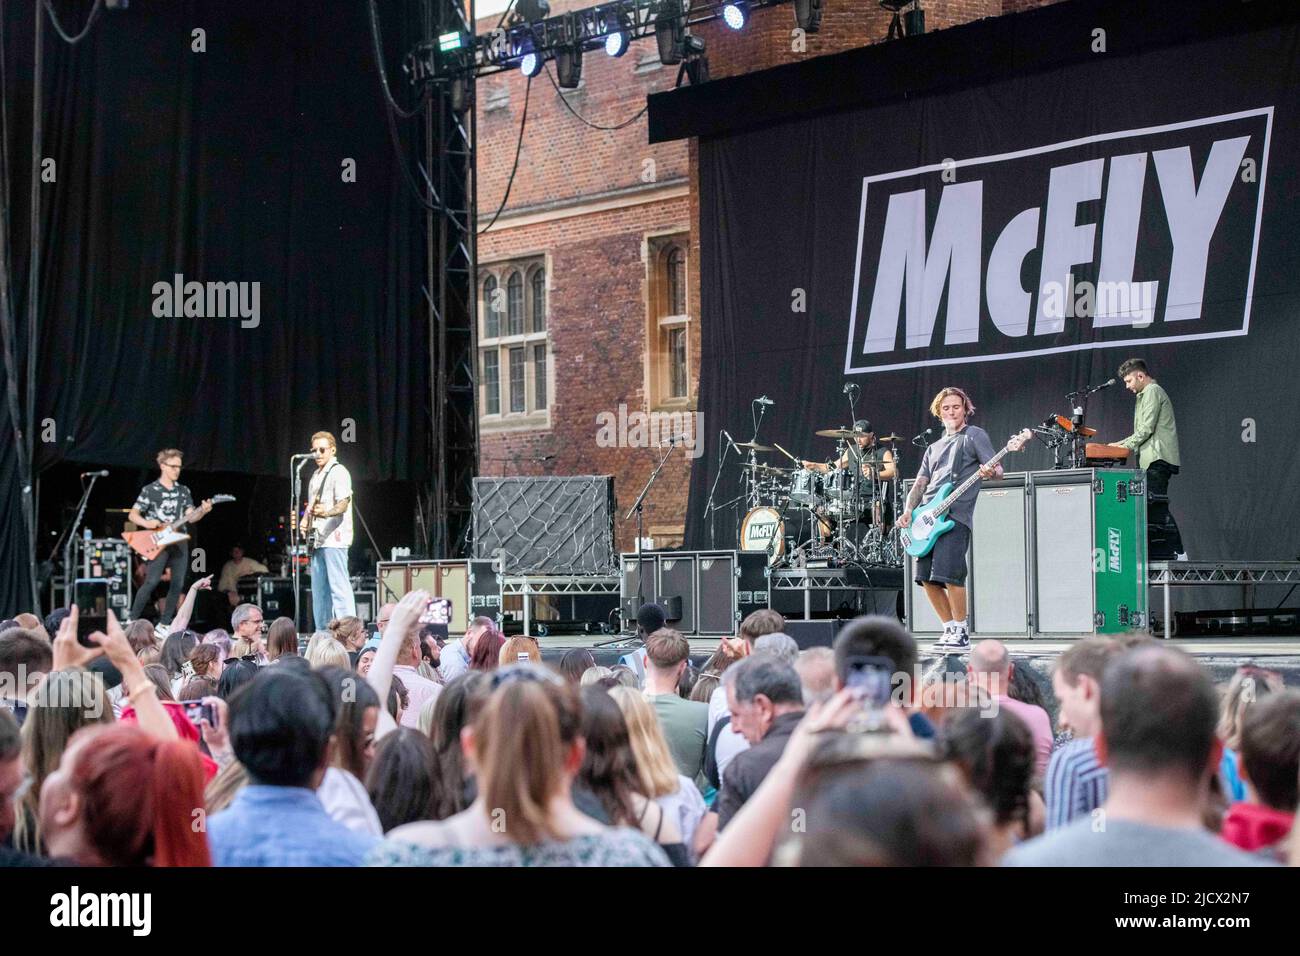 London, UK, Wednesday, 15th June 2022 McFly perform live on stage as part of the Hampton Court Palace Festival, Hampton Court, East Molesey. Credit: DavidJensen / Empics Entertainment / Alamy Live News Stock Photo